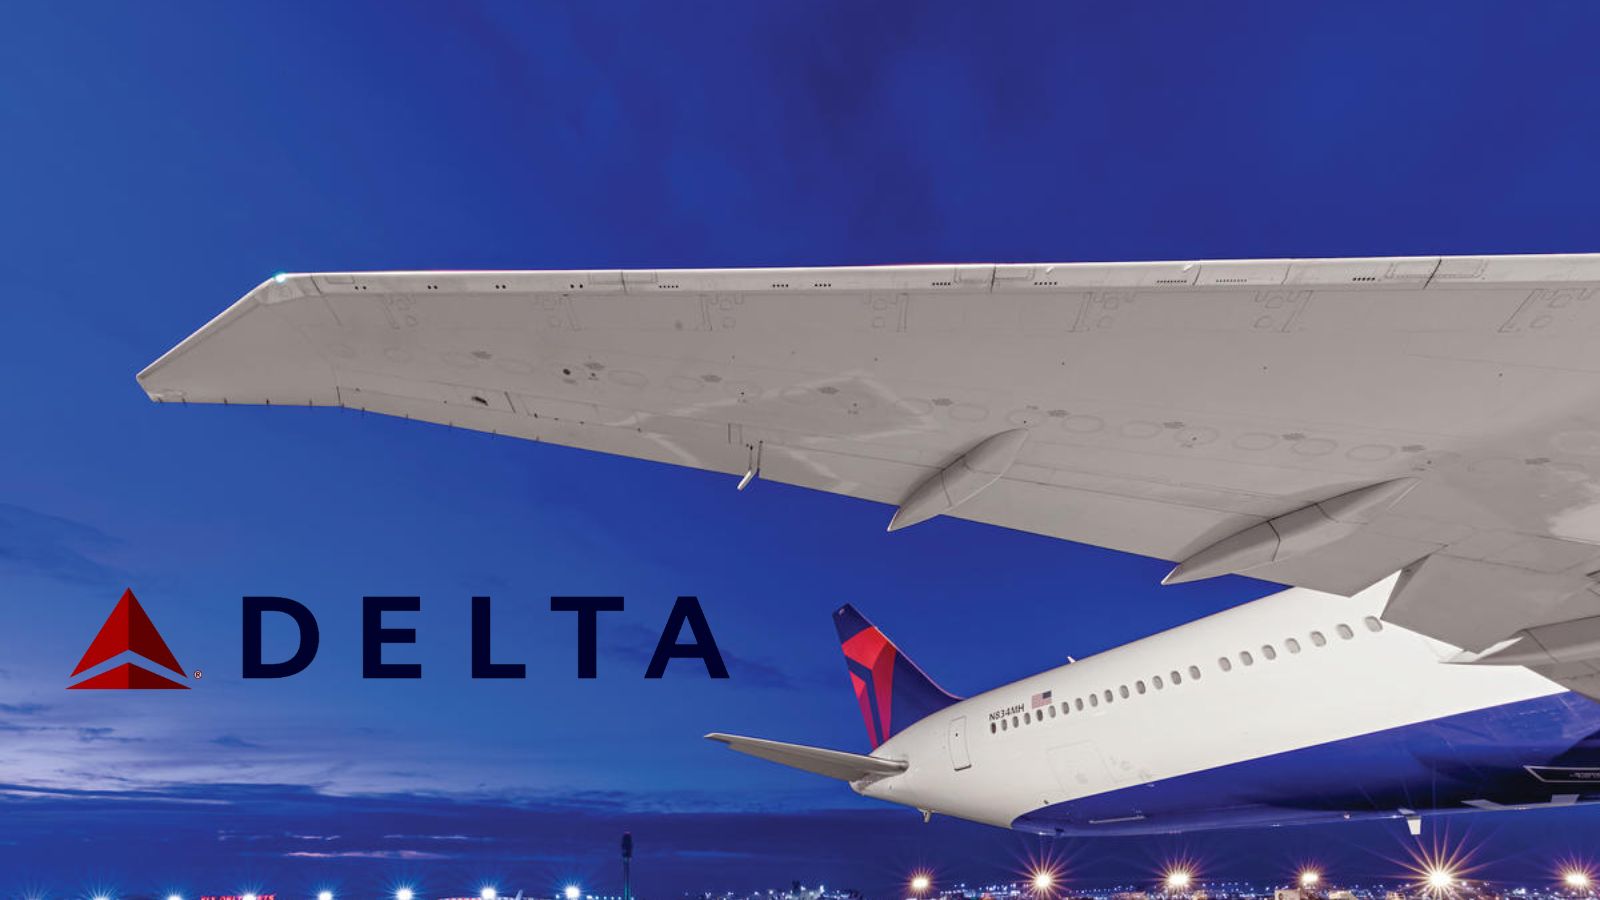 Delta Air Lines Amex Offer: Spend $250, get $50 back